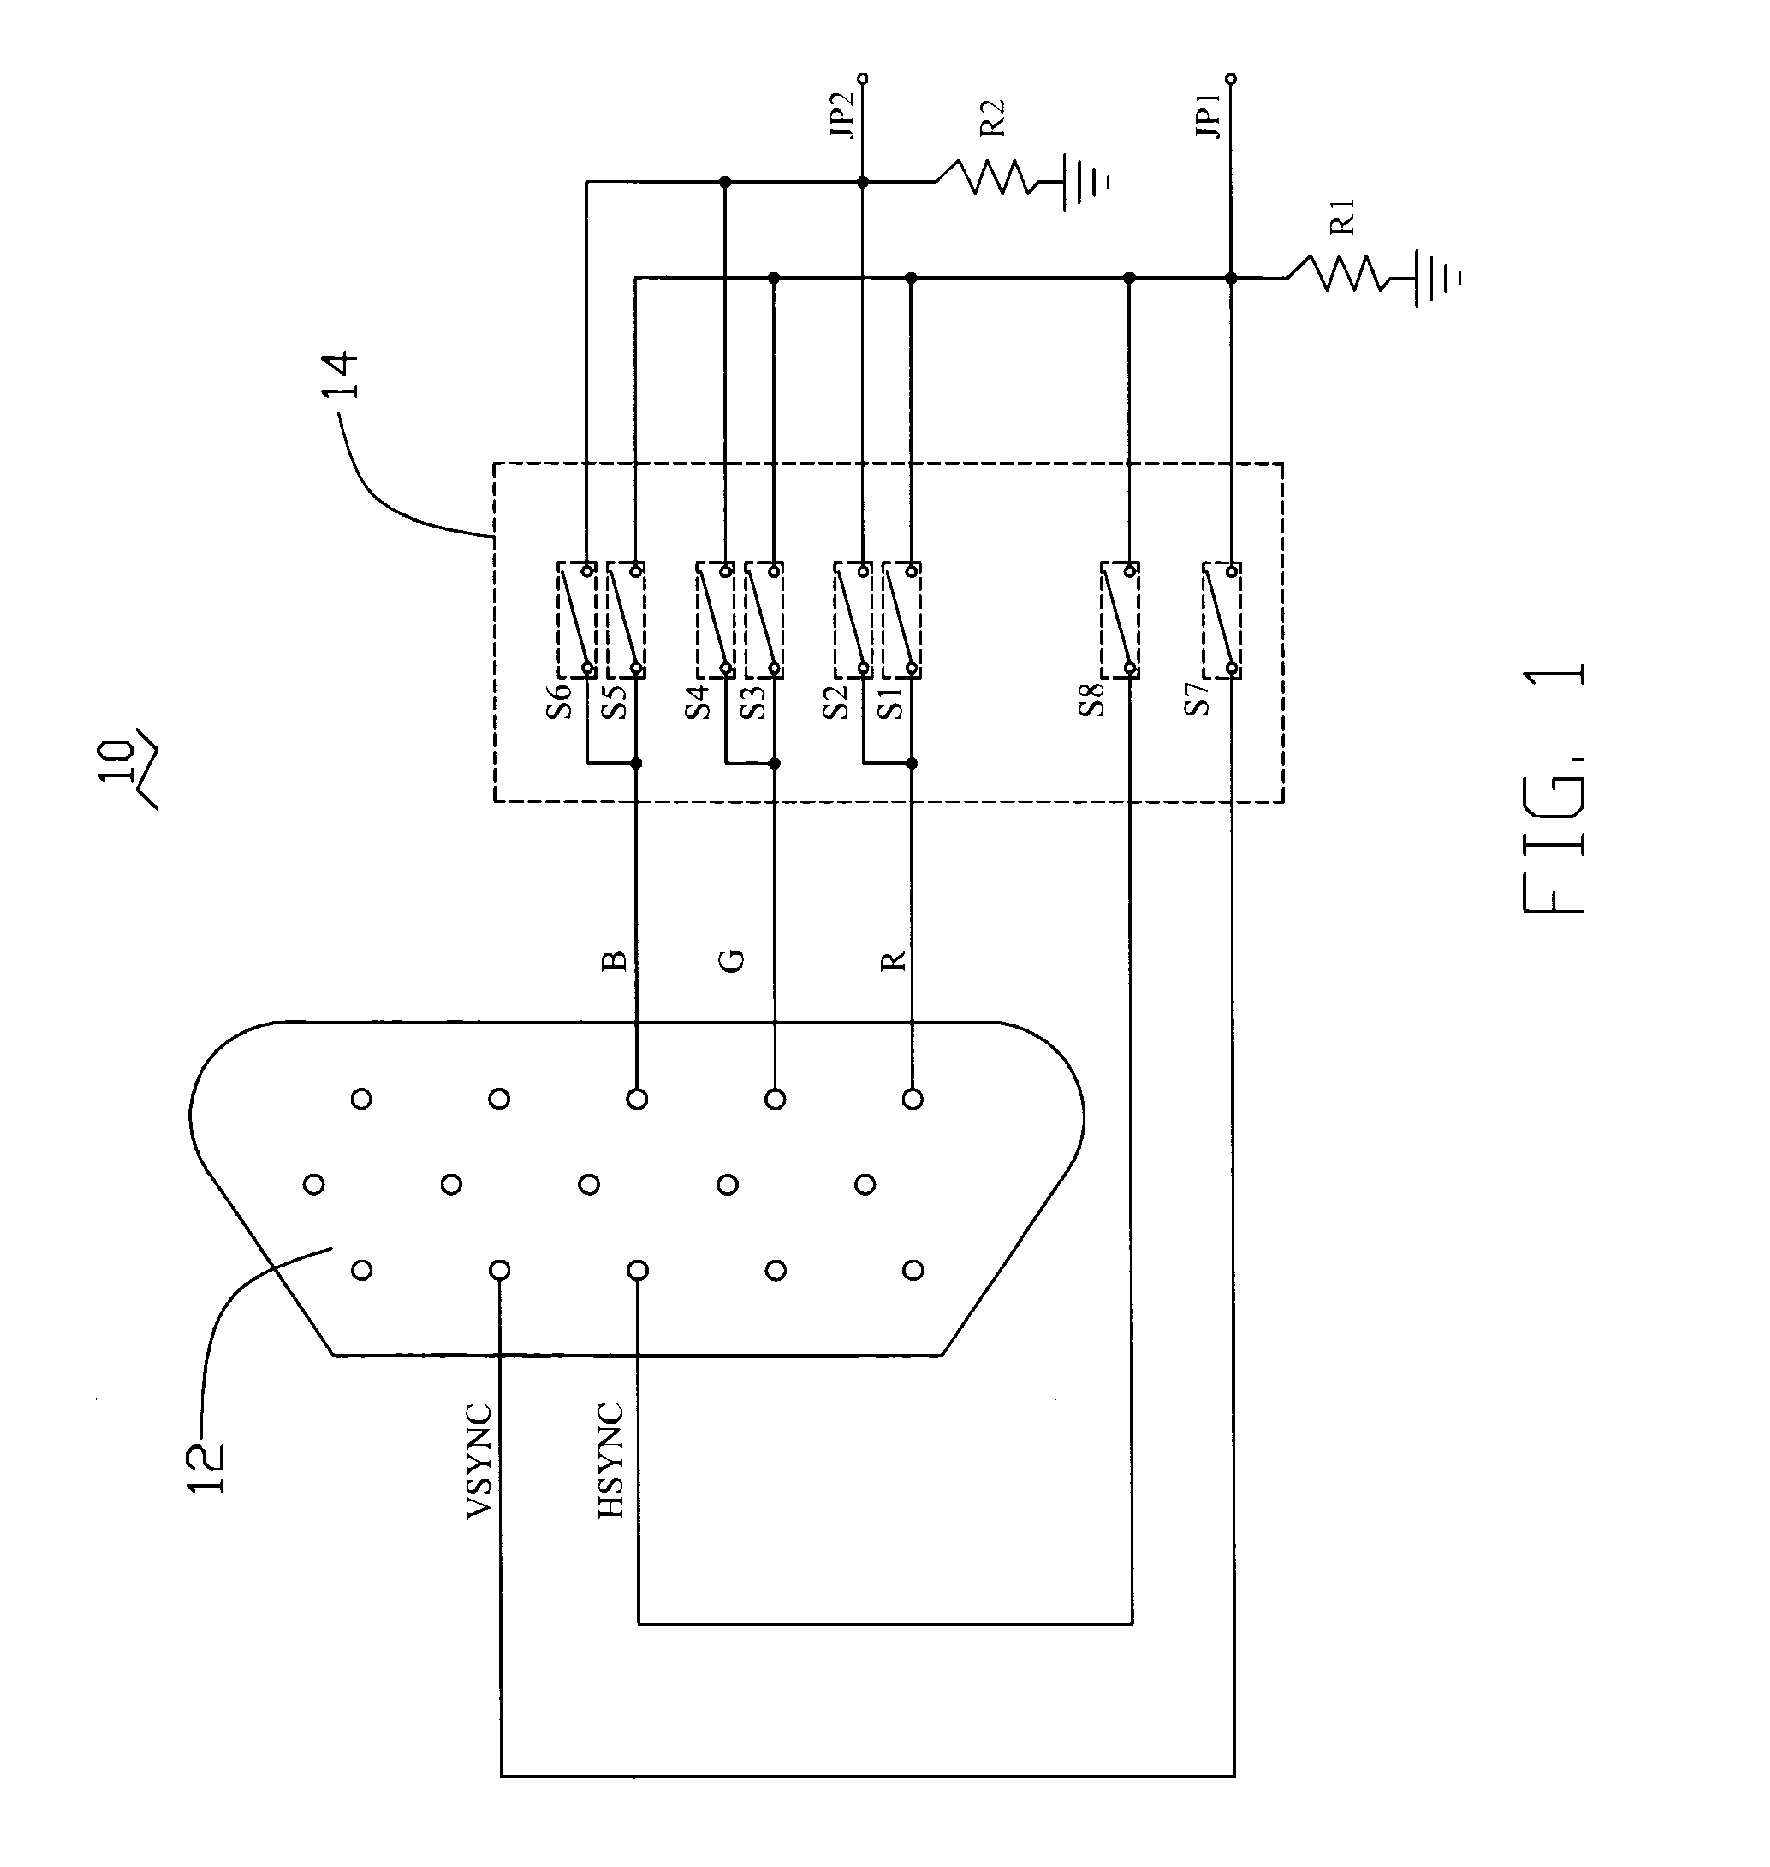 Apparatus for video graphics array testing